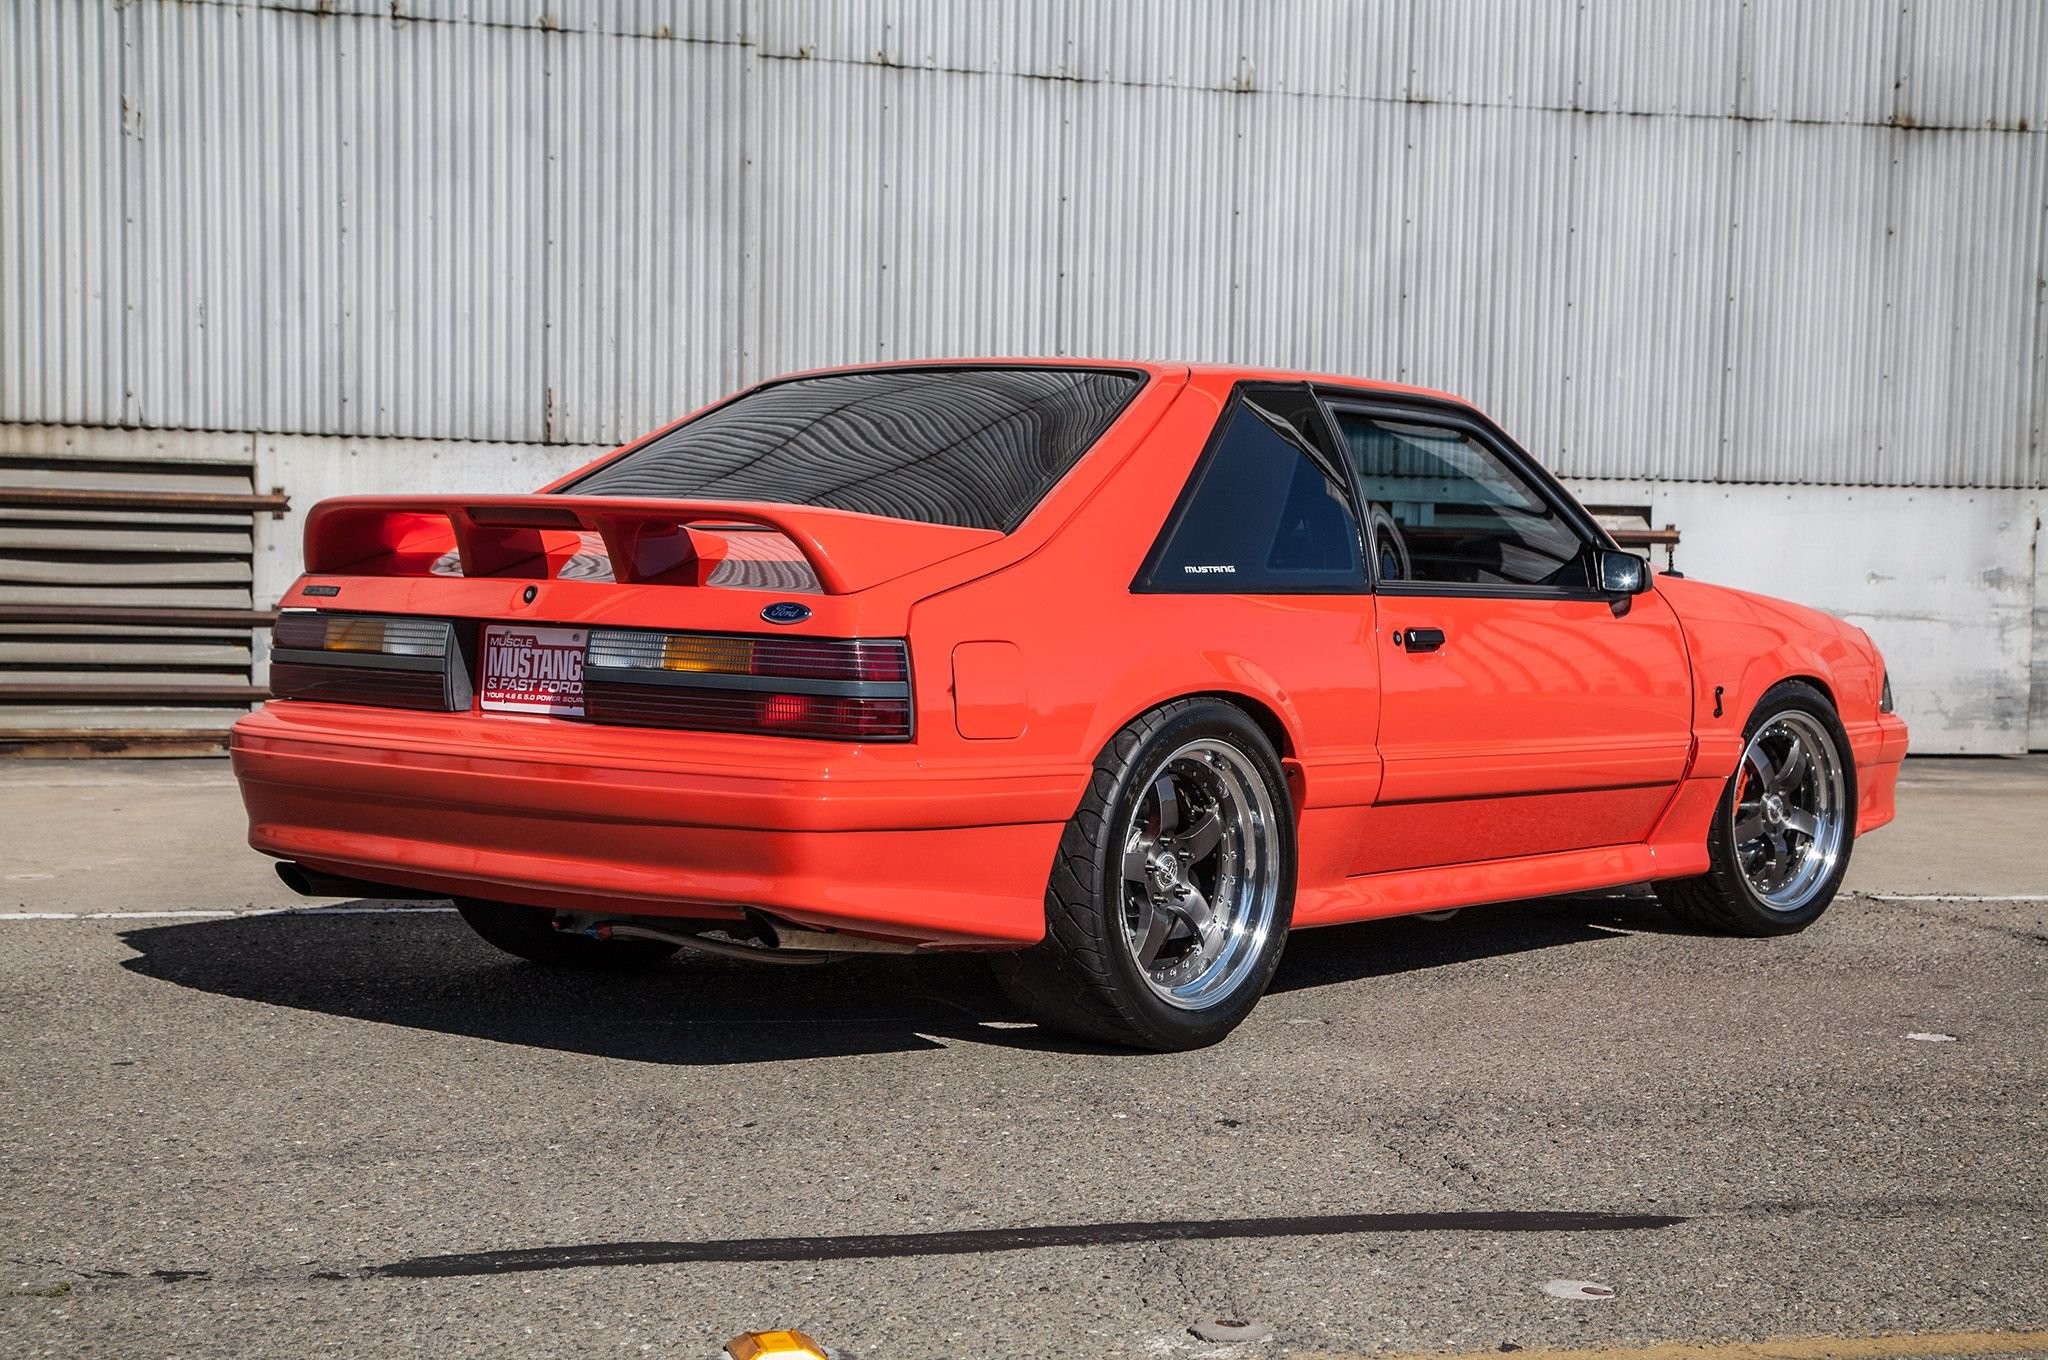 2048x1360 Terminator Swapped 1993 Fox Cobra Ford Mustang cars modified orange  wallpaper |  | 662240 | WallpaperUP